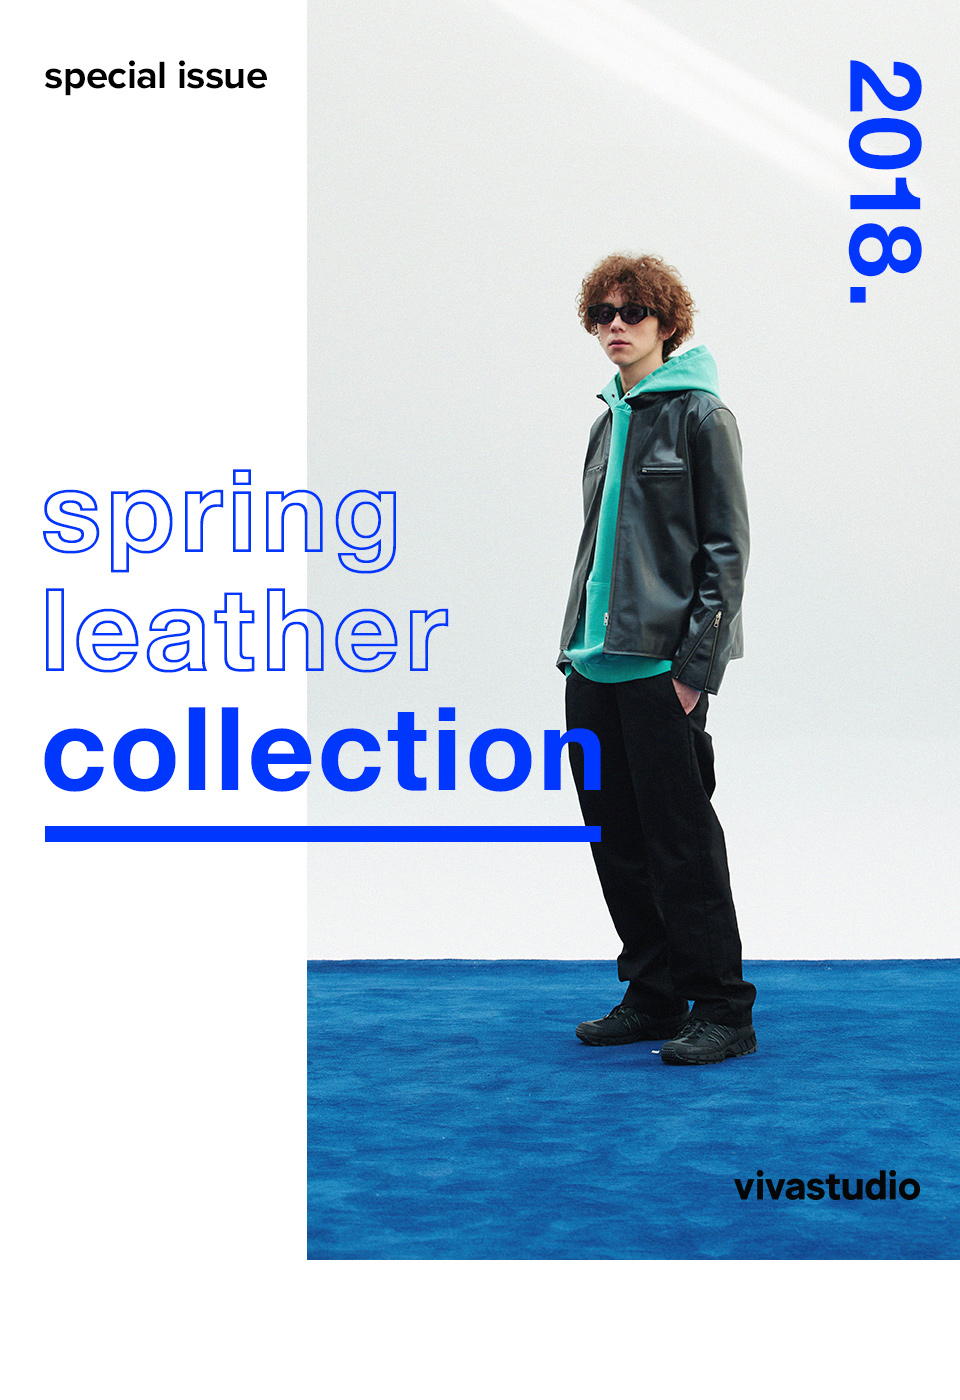 spring leather collection